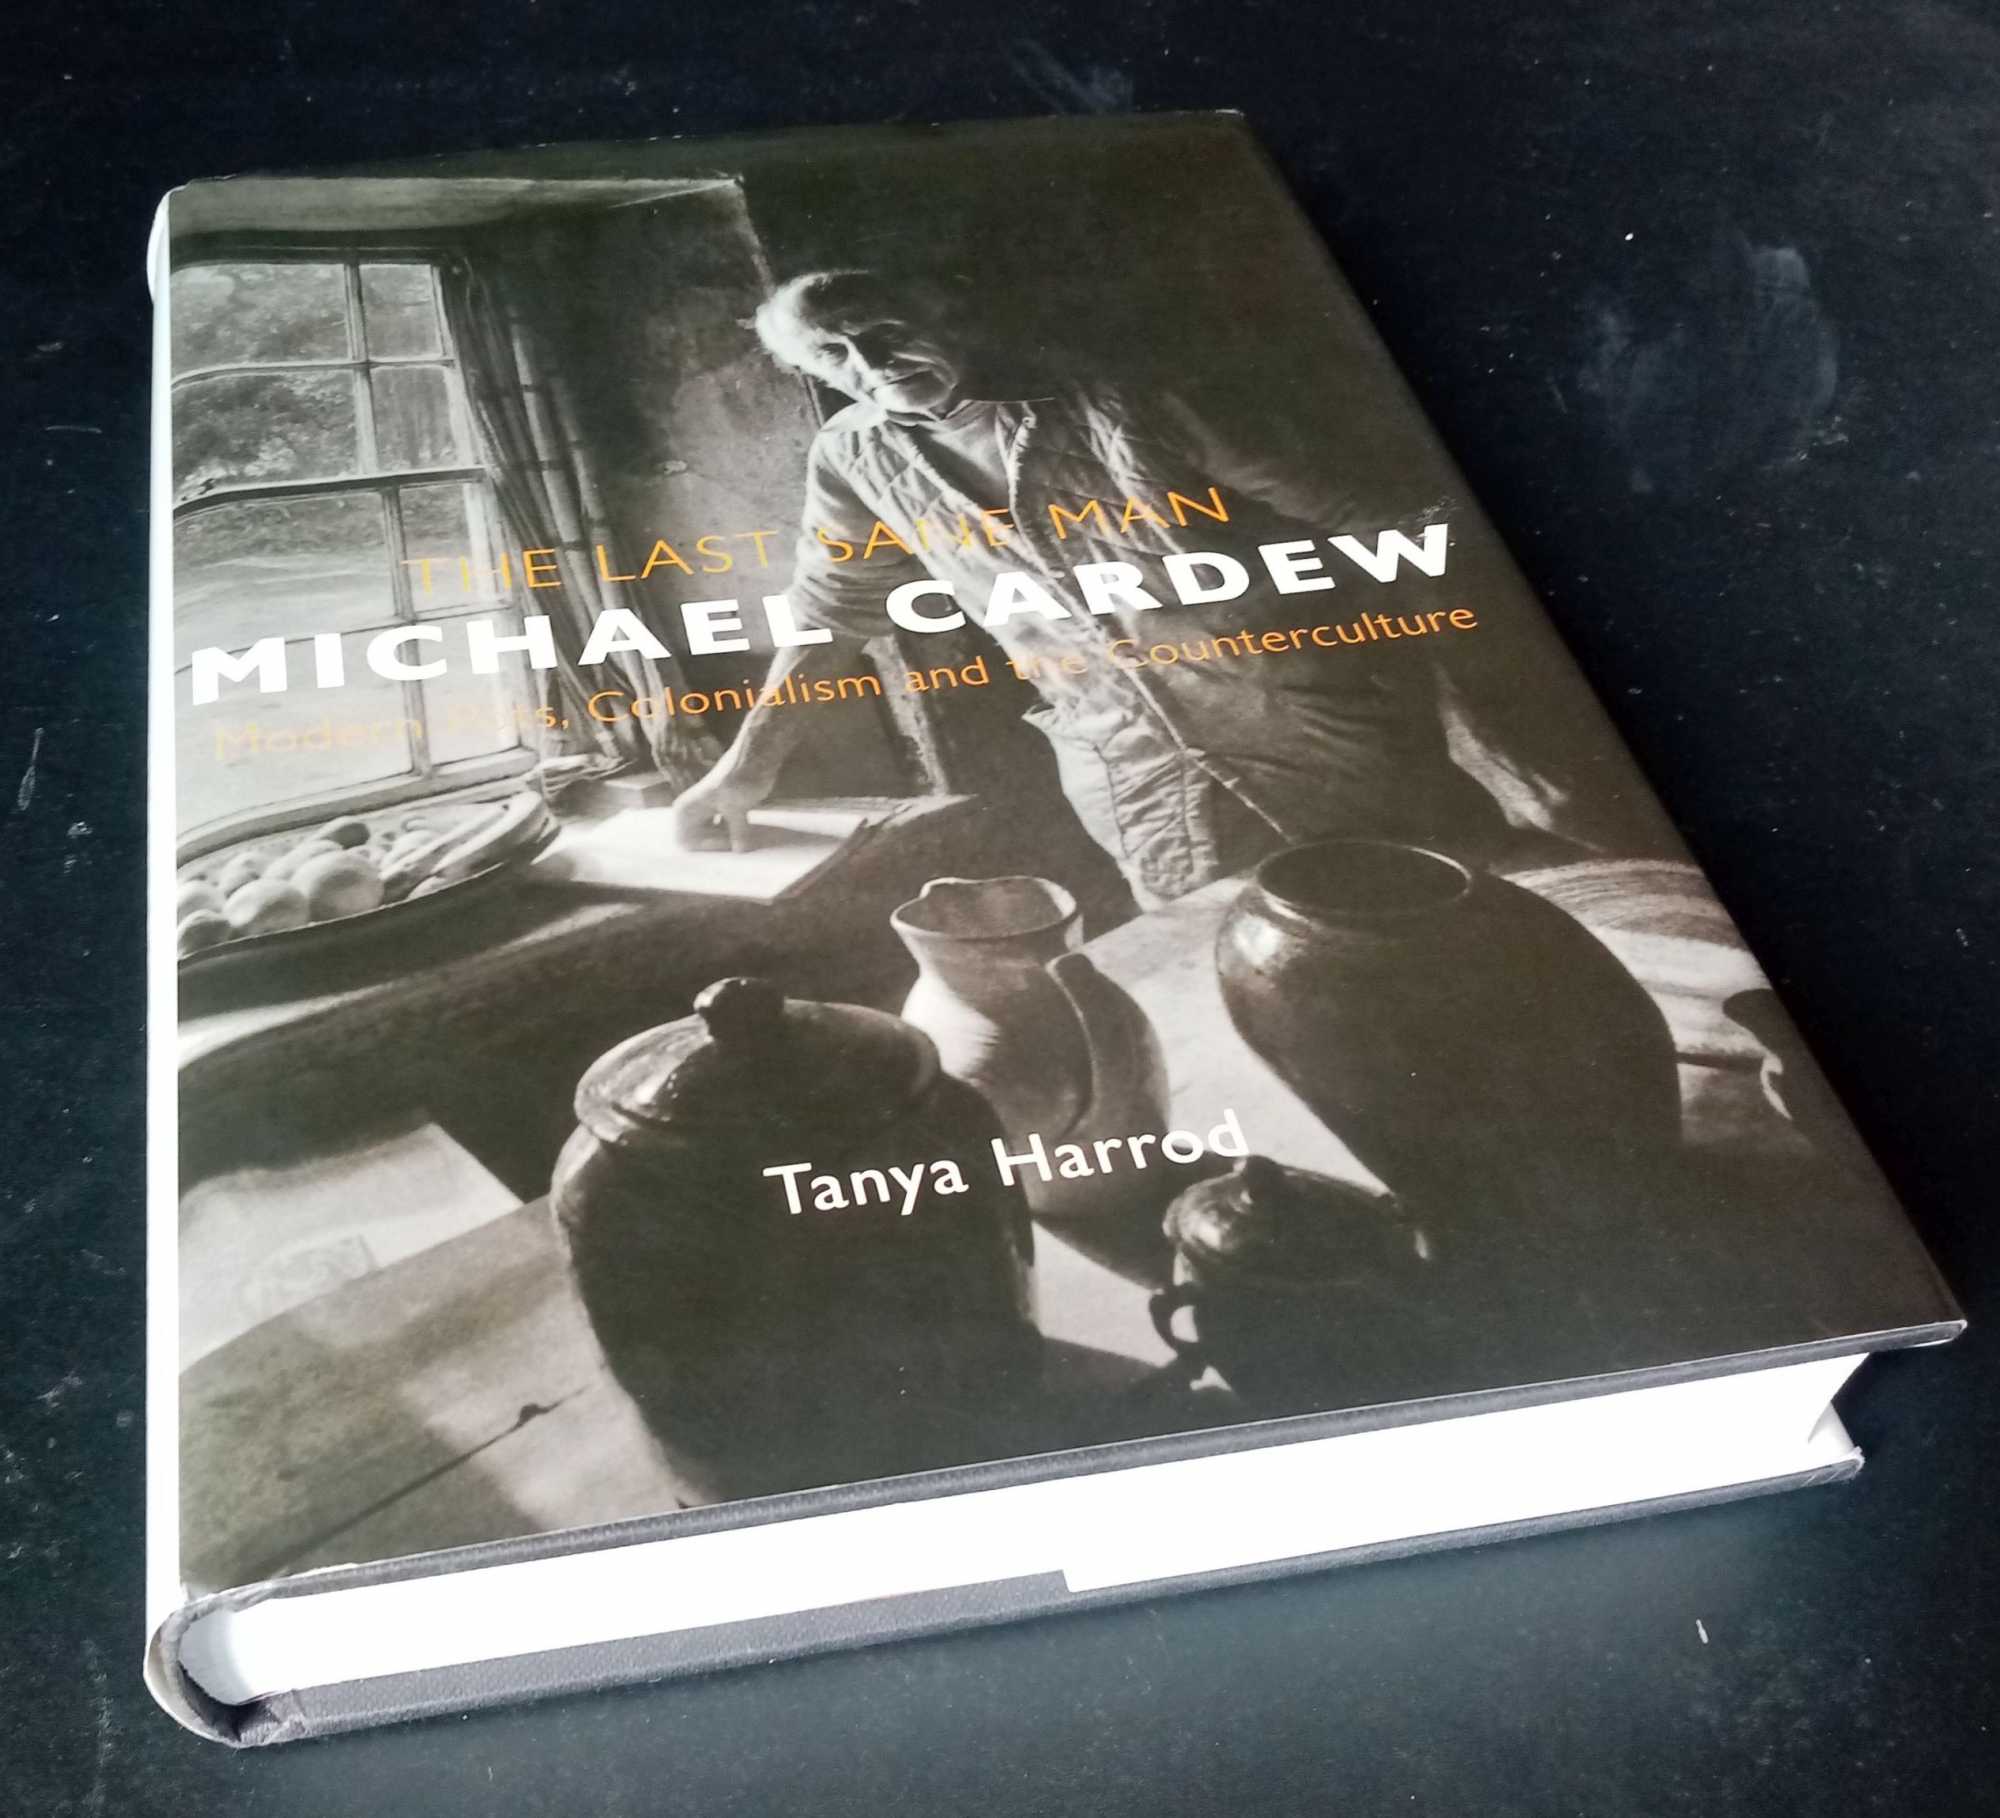 Tanya Harrod - The Last Sane Man: Michael Cardew: Modern Pots, Colonialism, and Counterculture    SIGNED/Inscribed